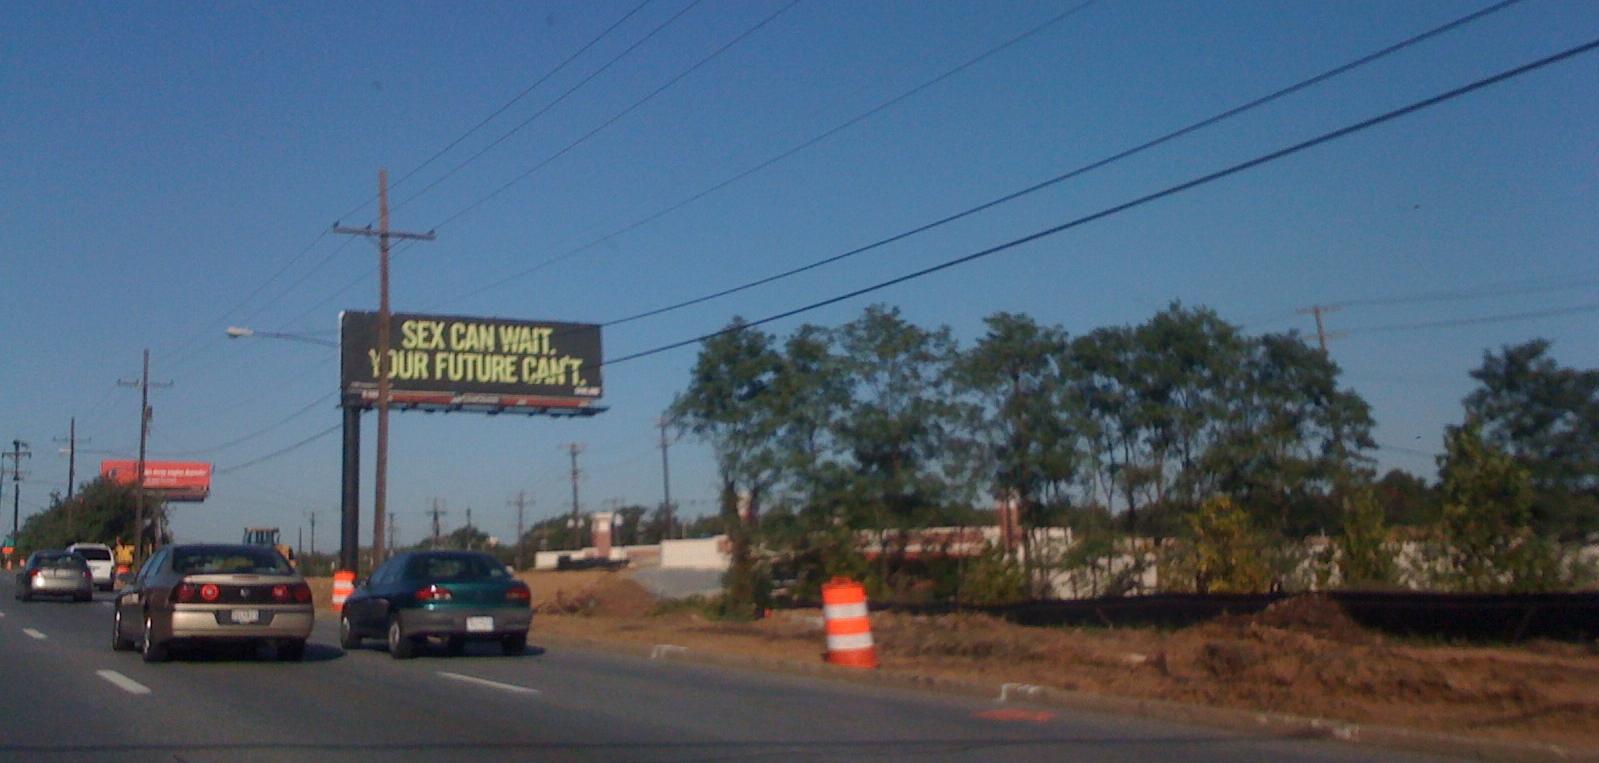 A sign board that says "Sex can wait. Your Future Can't"